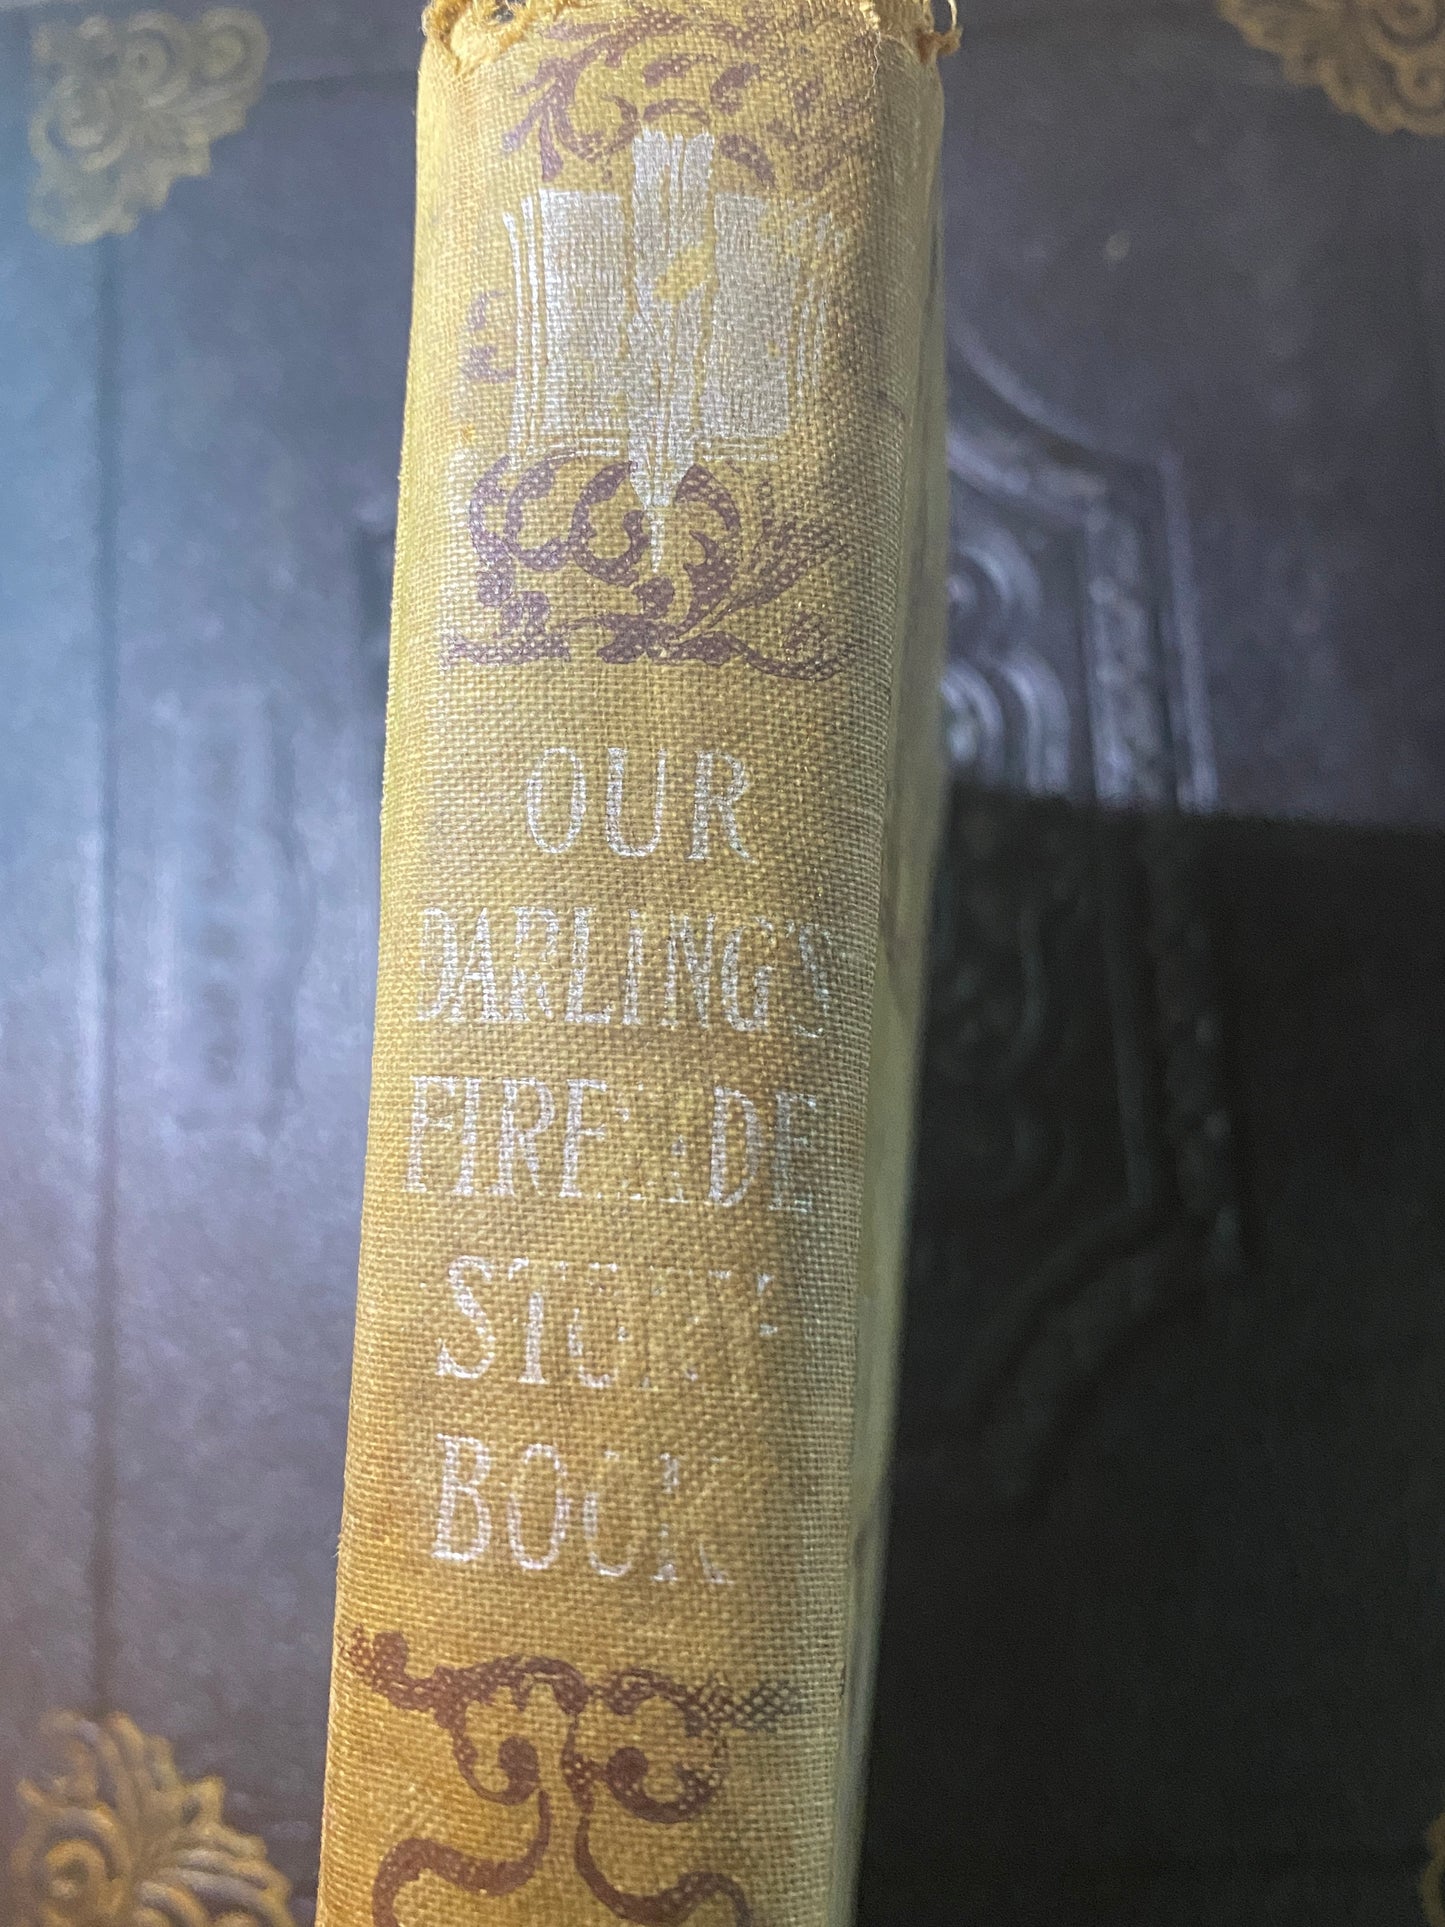 Our Darlings Fireside Story Book, 1895. Rare illustrated Victorian era children’s book.